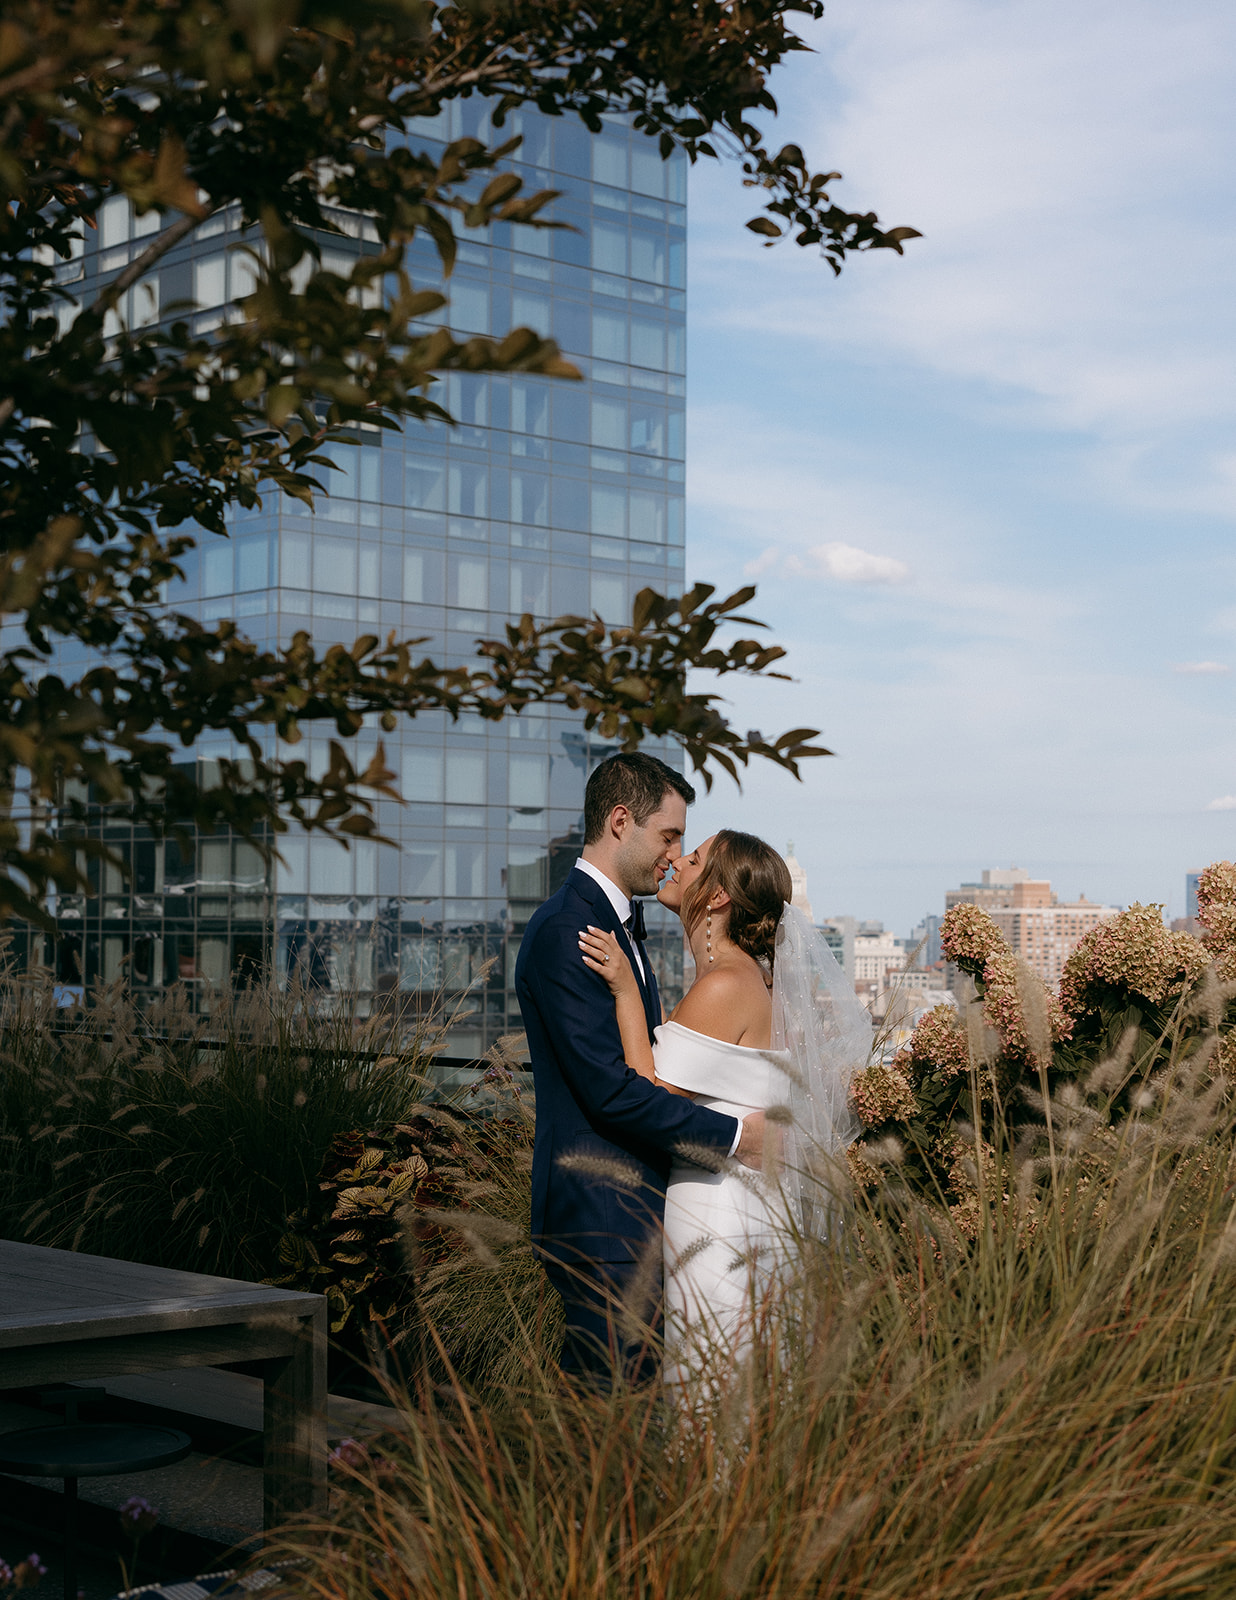 A bride and groom share a kiss on their wedding day on a rooftop in NYC